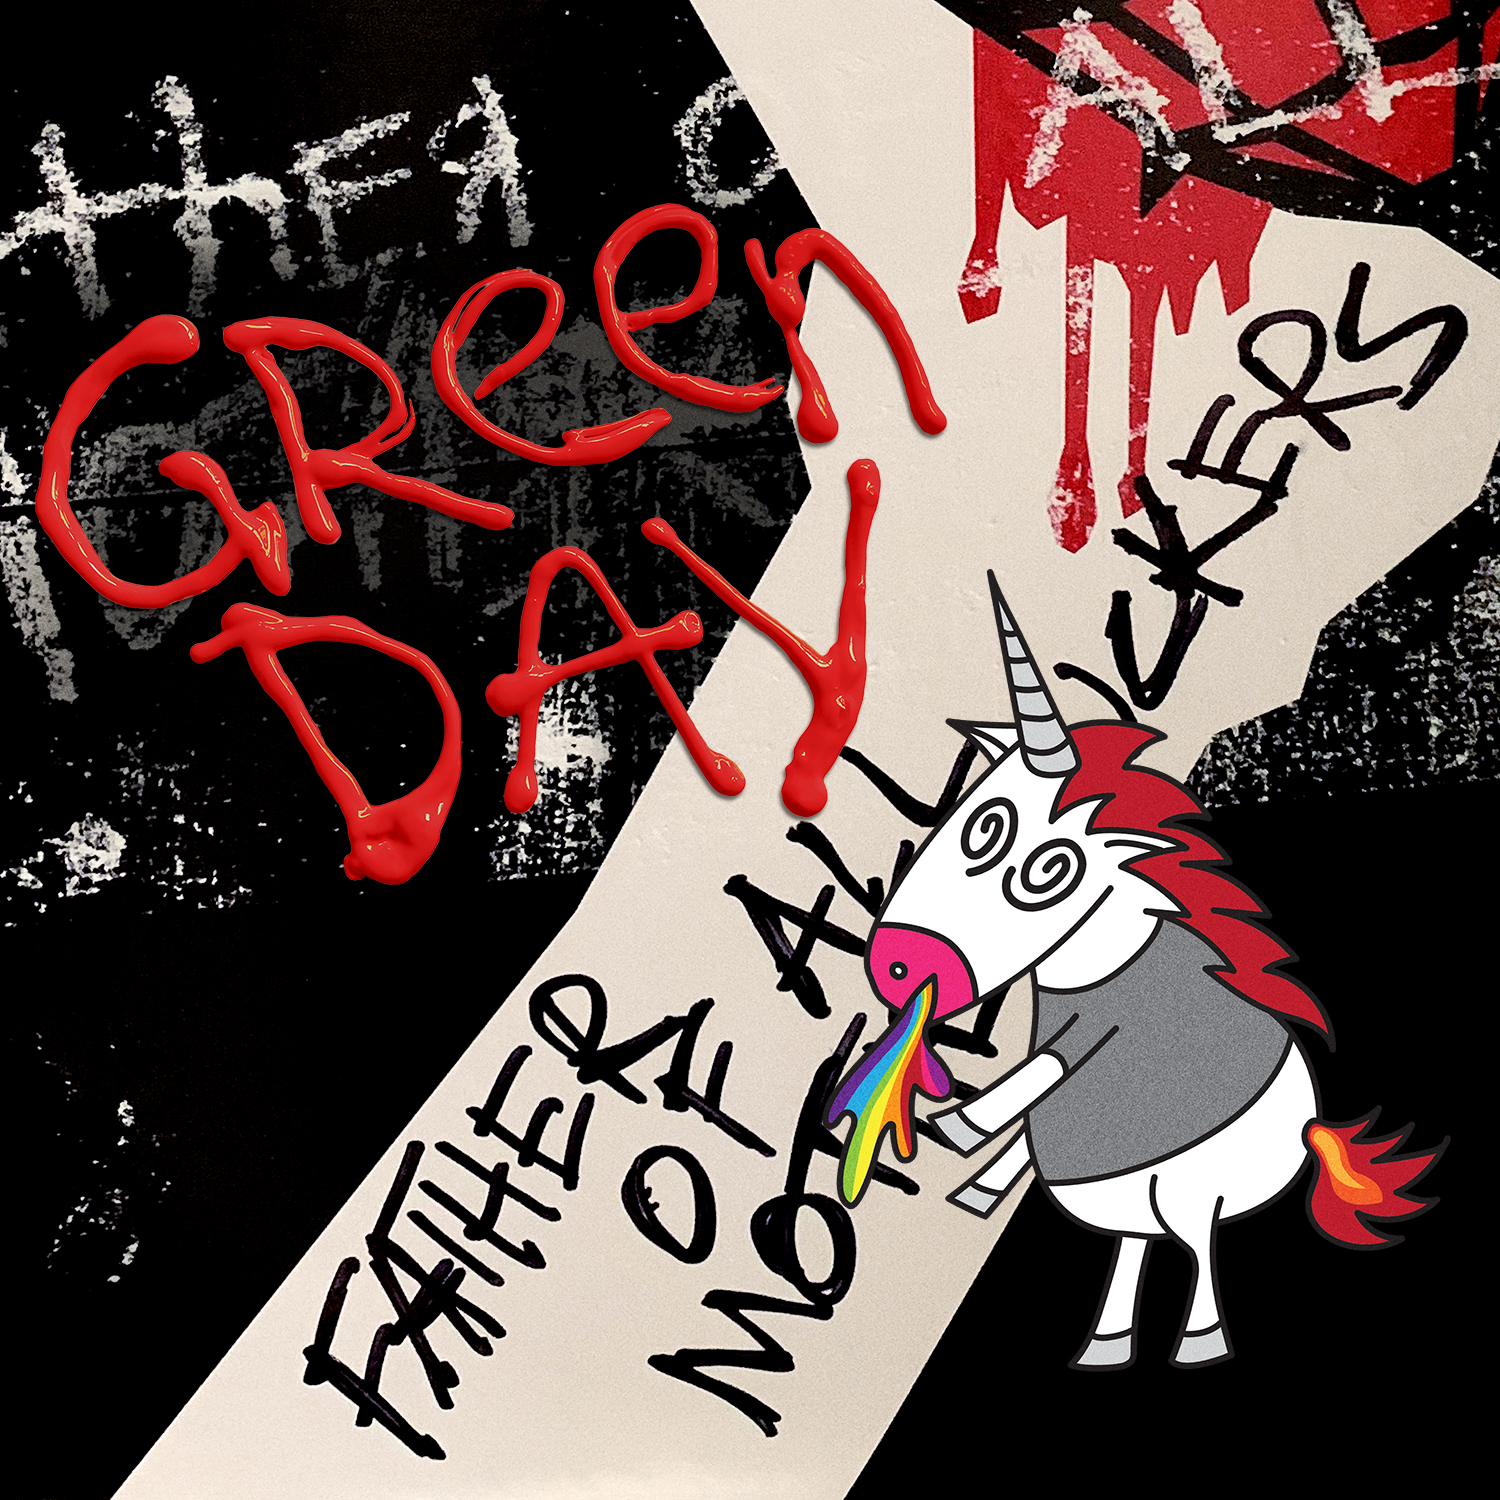 Green Day Father of All album cover